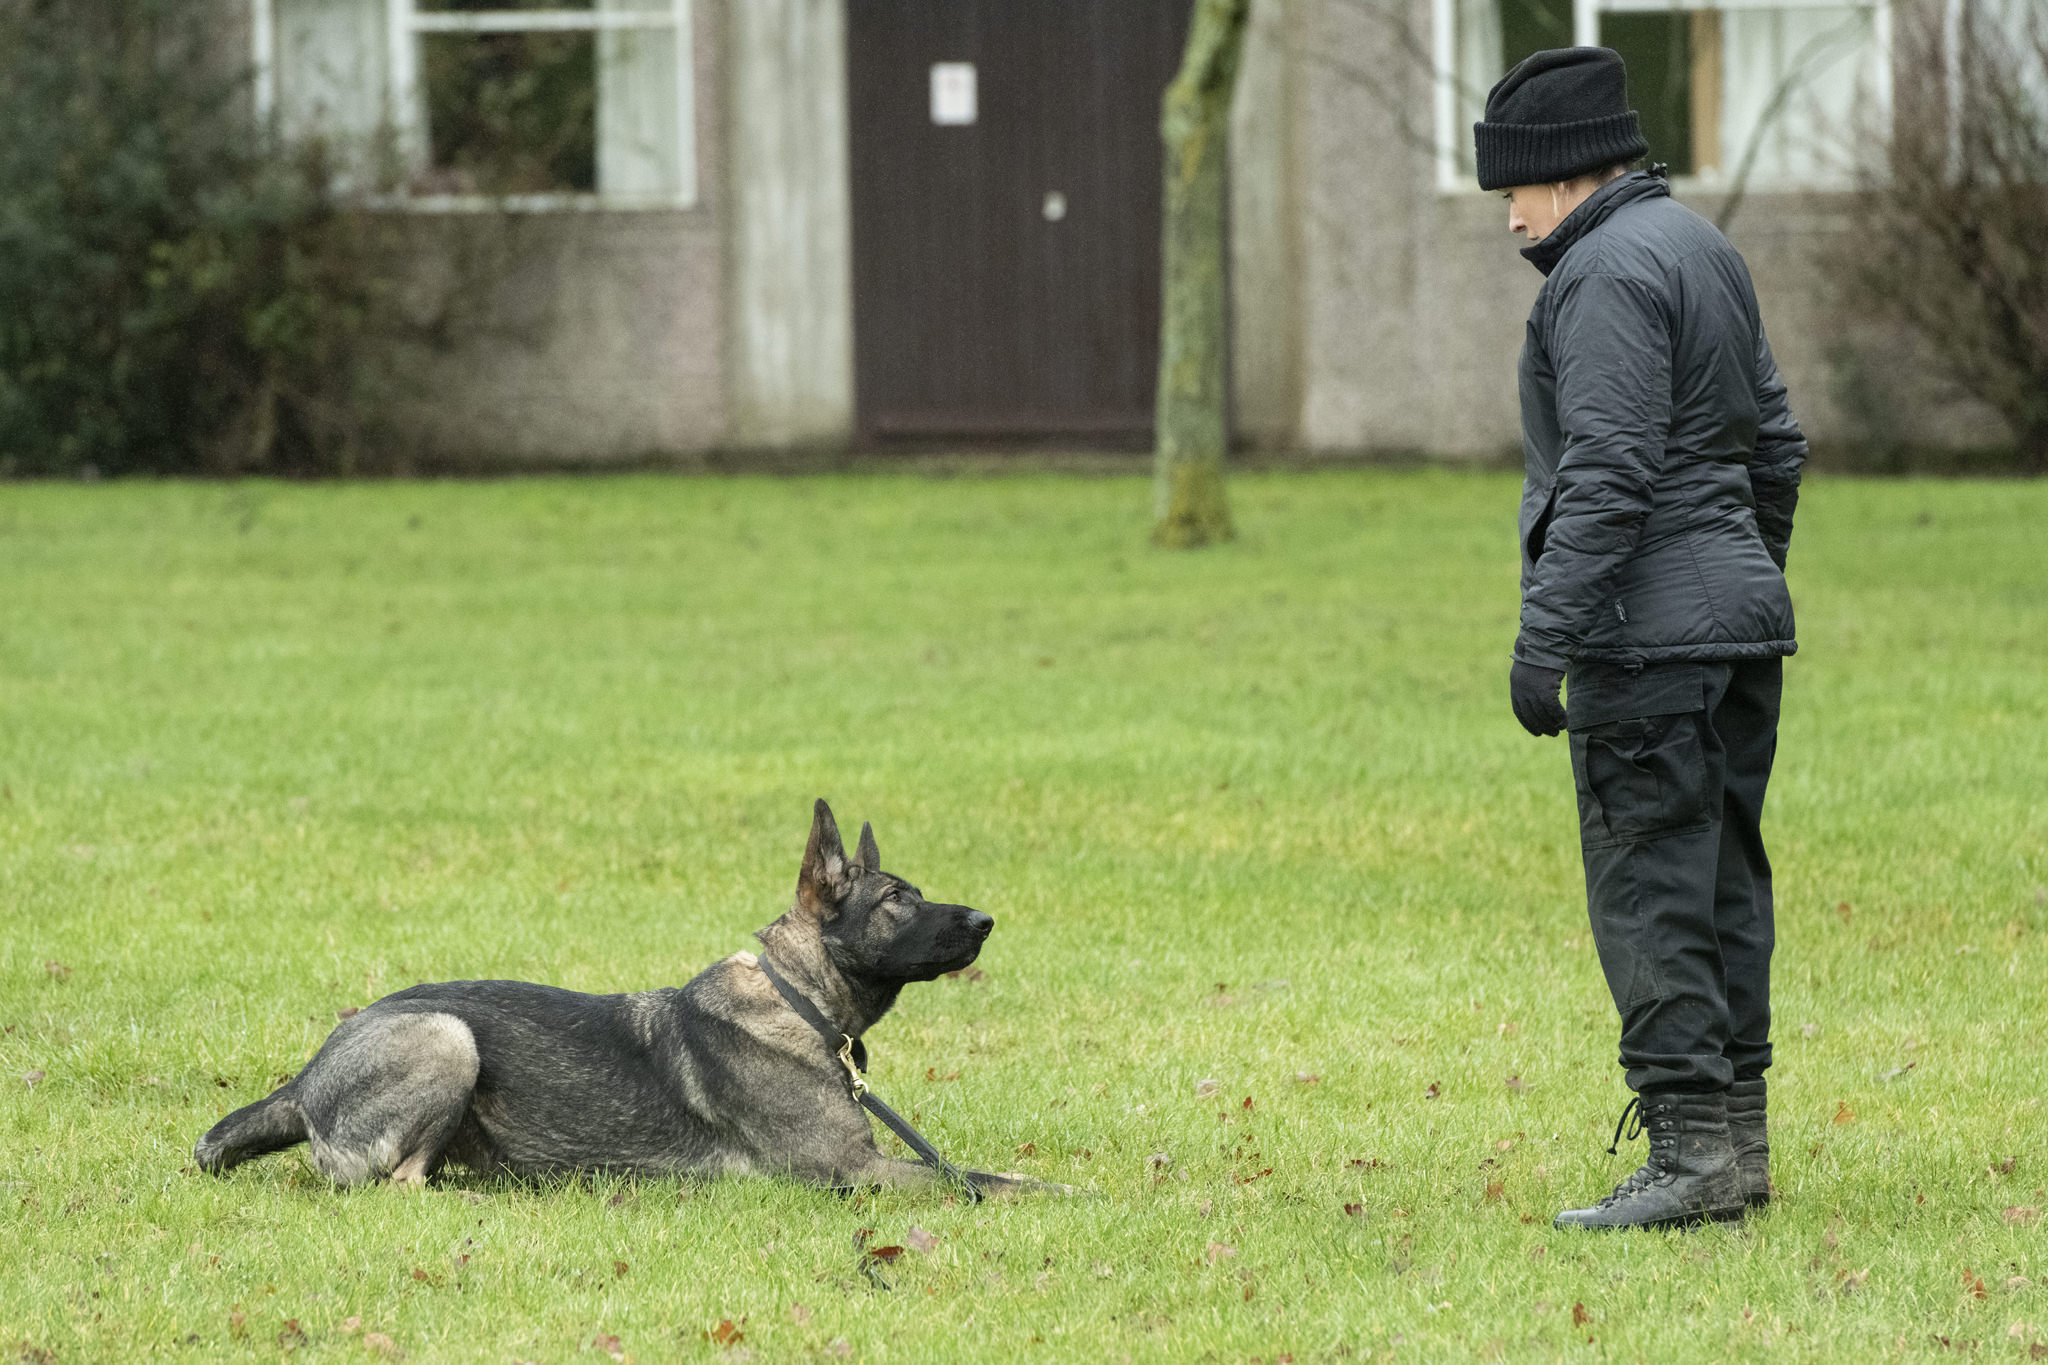 Police dog Cody working with his handler.